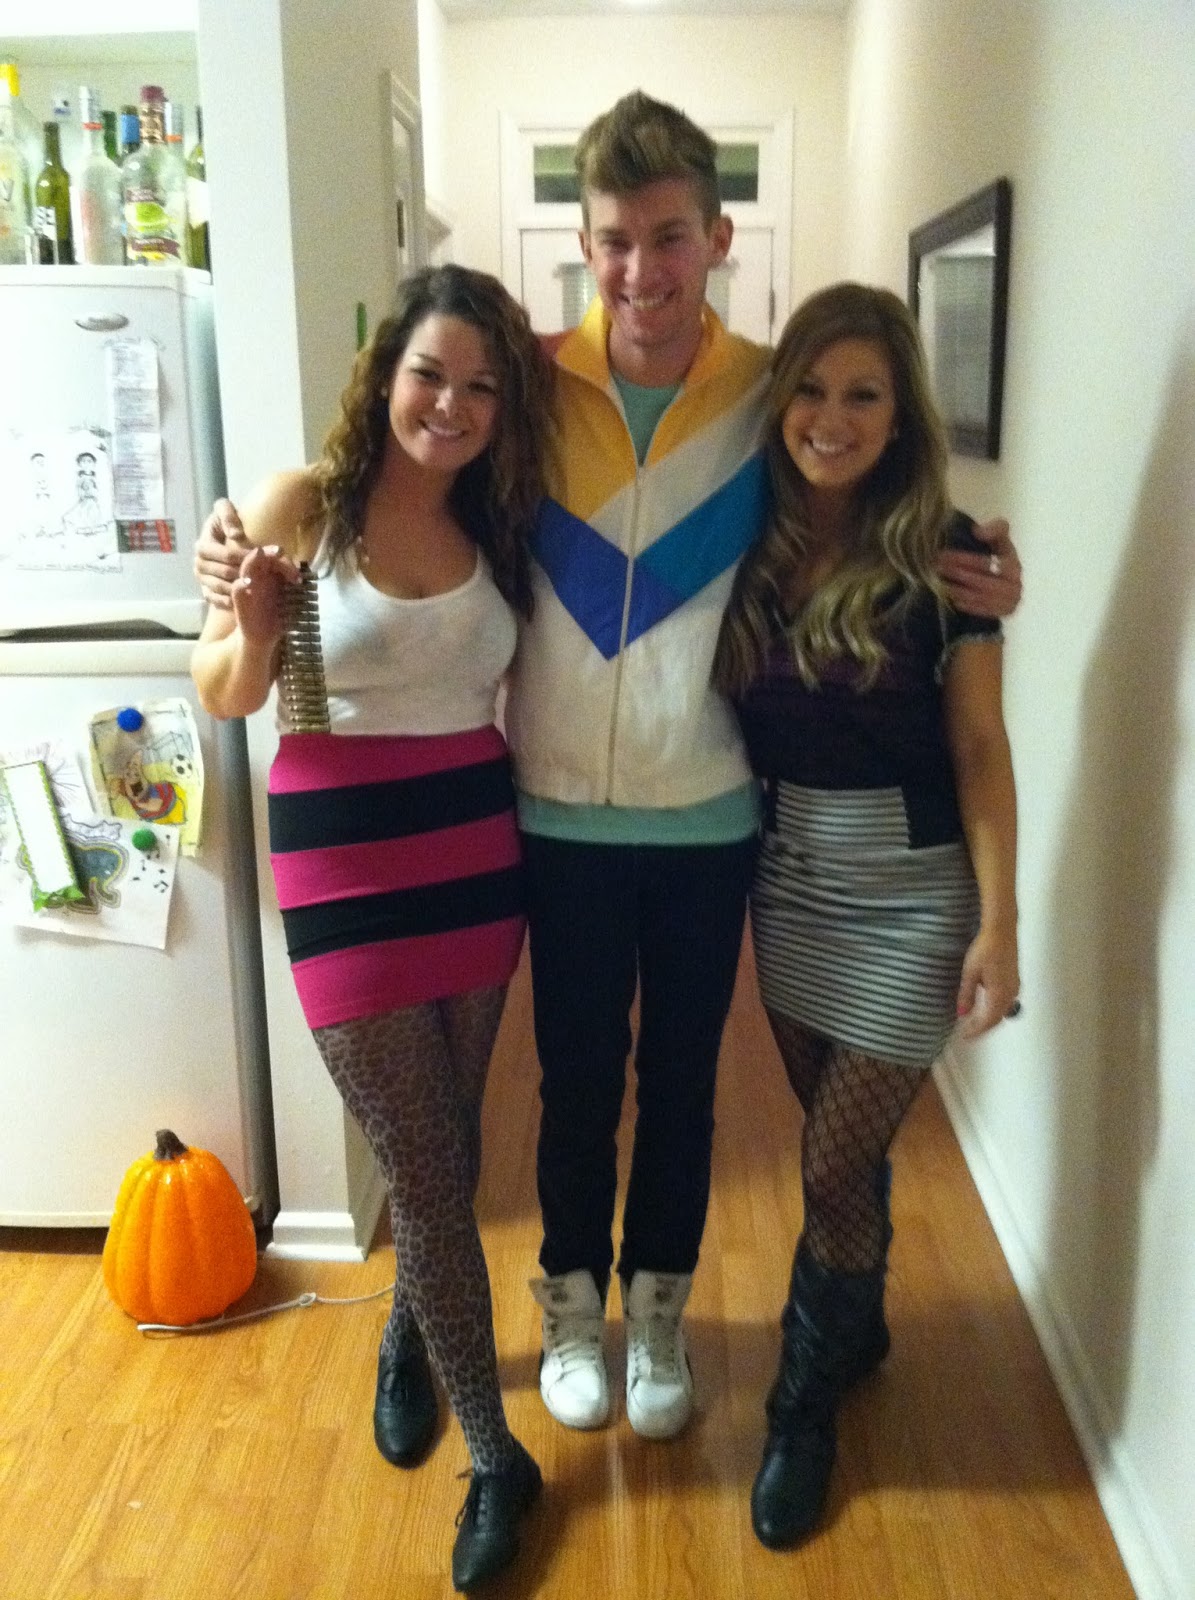 What to wear to a rave: neon clothes, zeds dead, and great friends ...